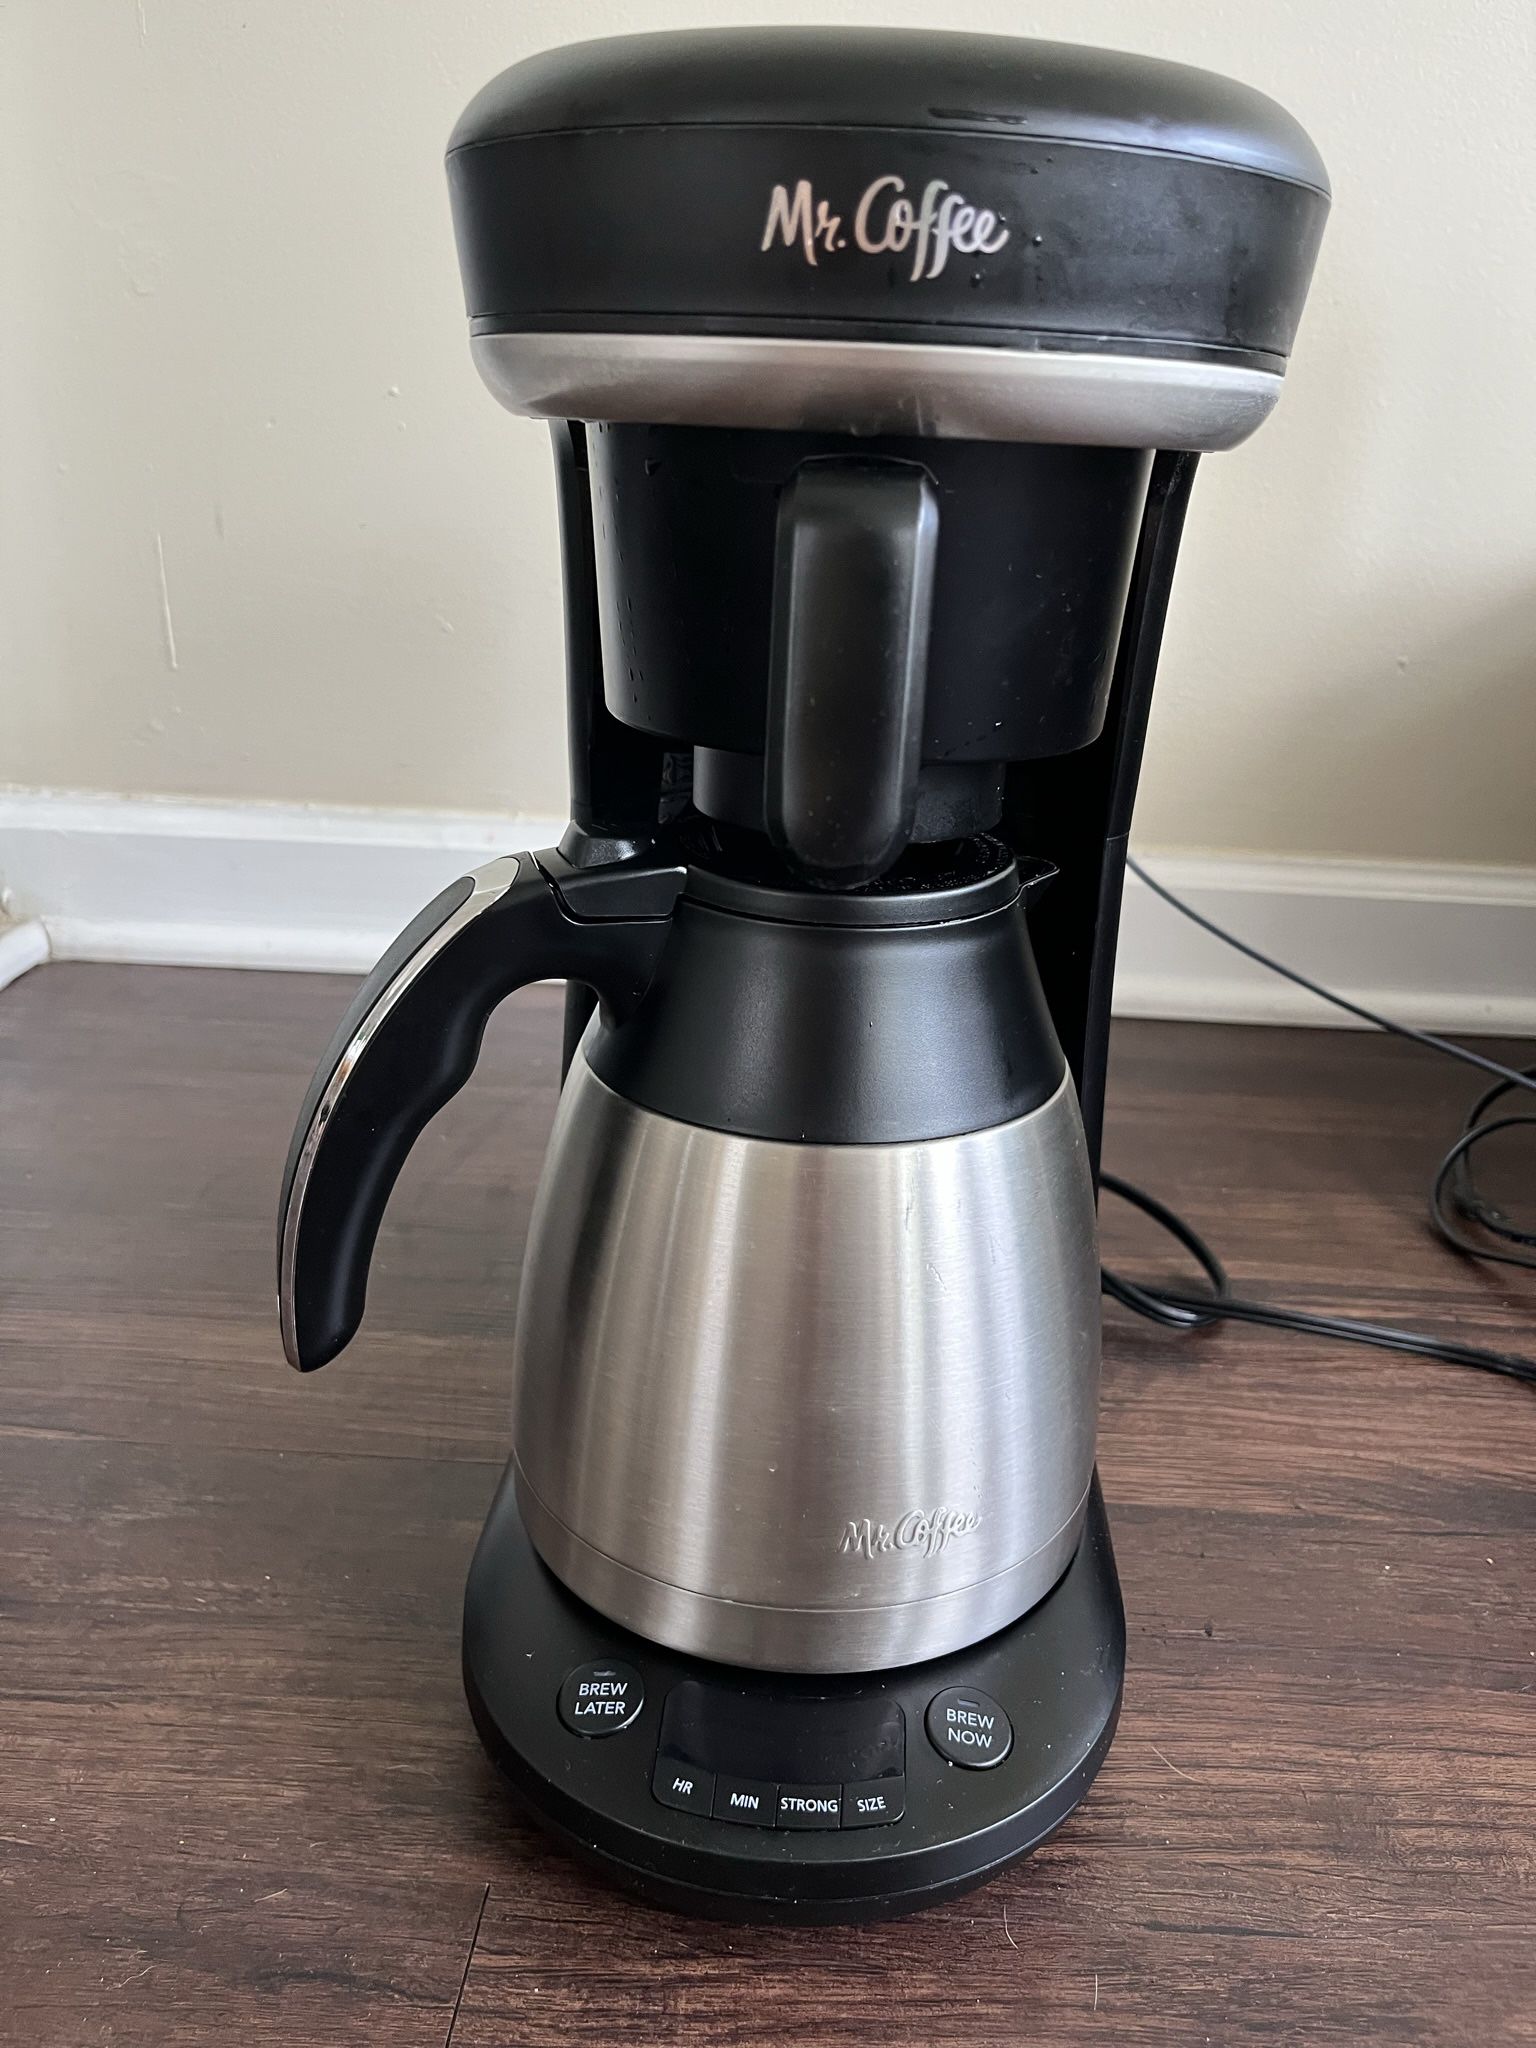 Mr. Coffee Coffee Maker, Programmable Coffee Machine for Single Serve or Carafe